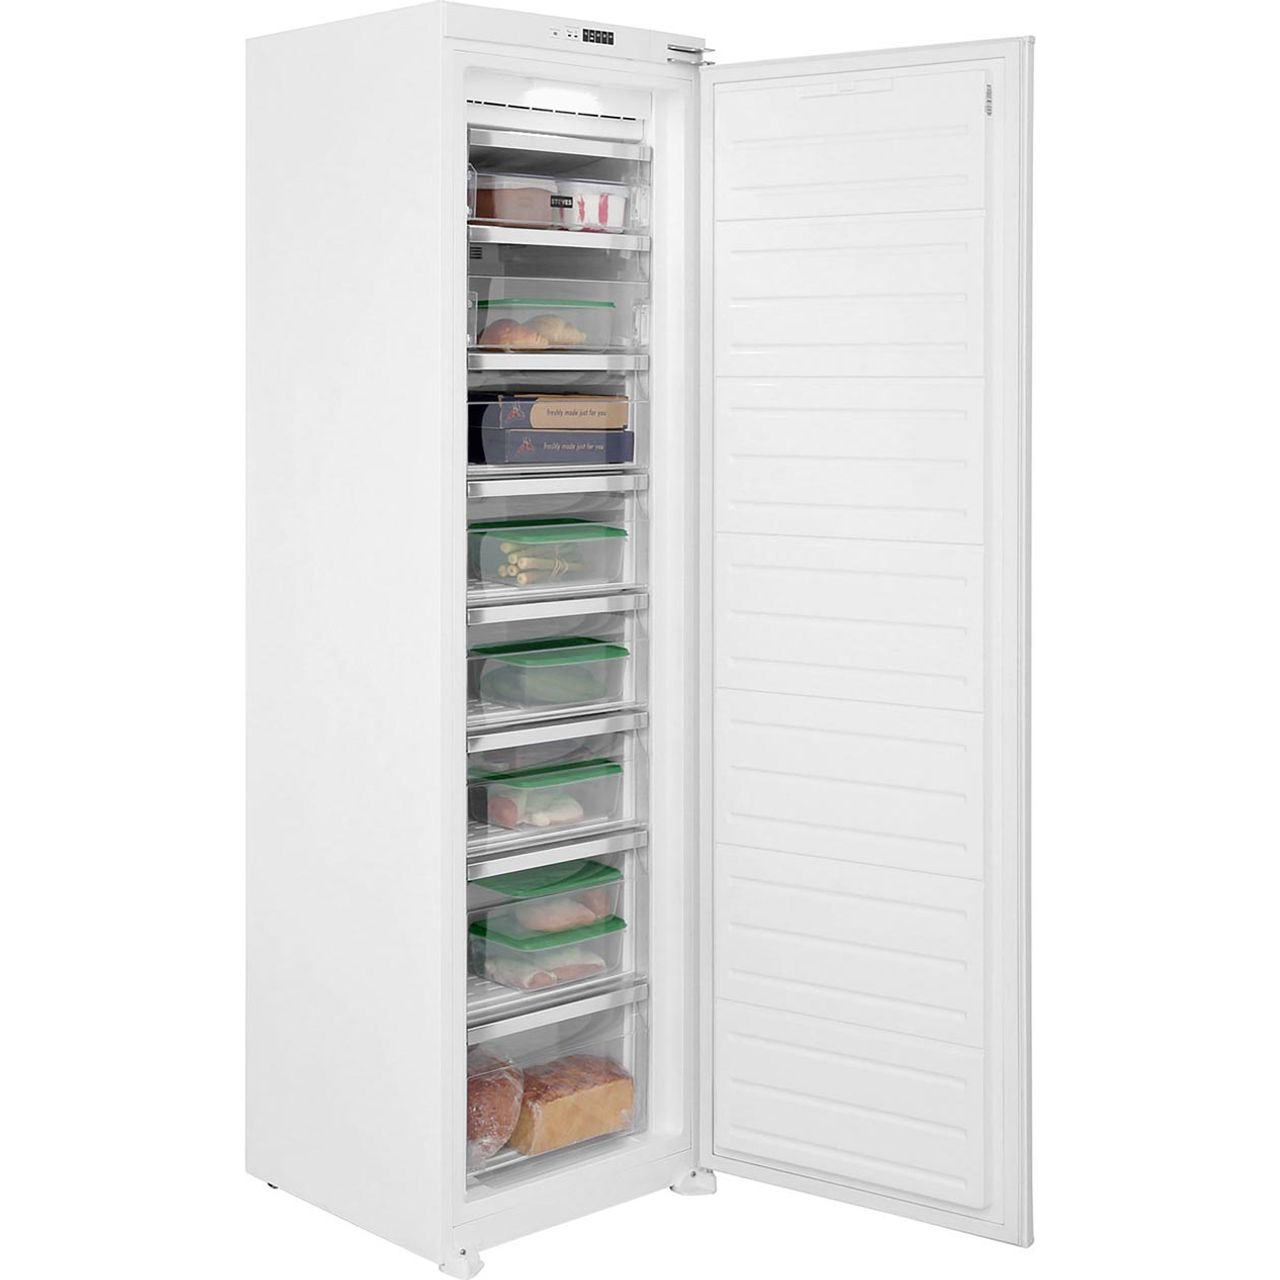 Stoves INT TALL FRZ Integrated Frost Free Upright Freezer with Sliding Door Fixing Kit Review